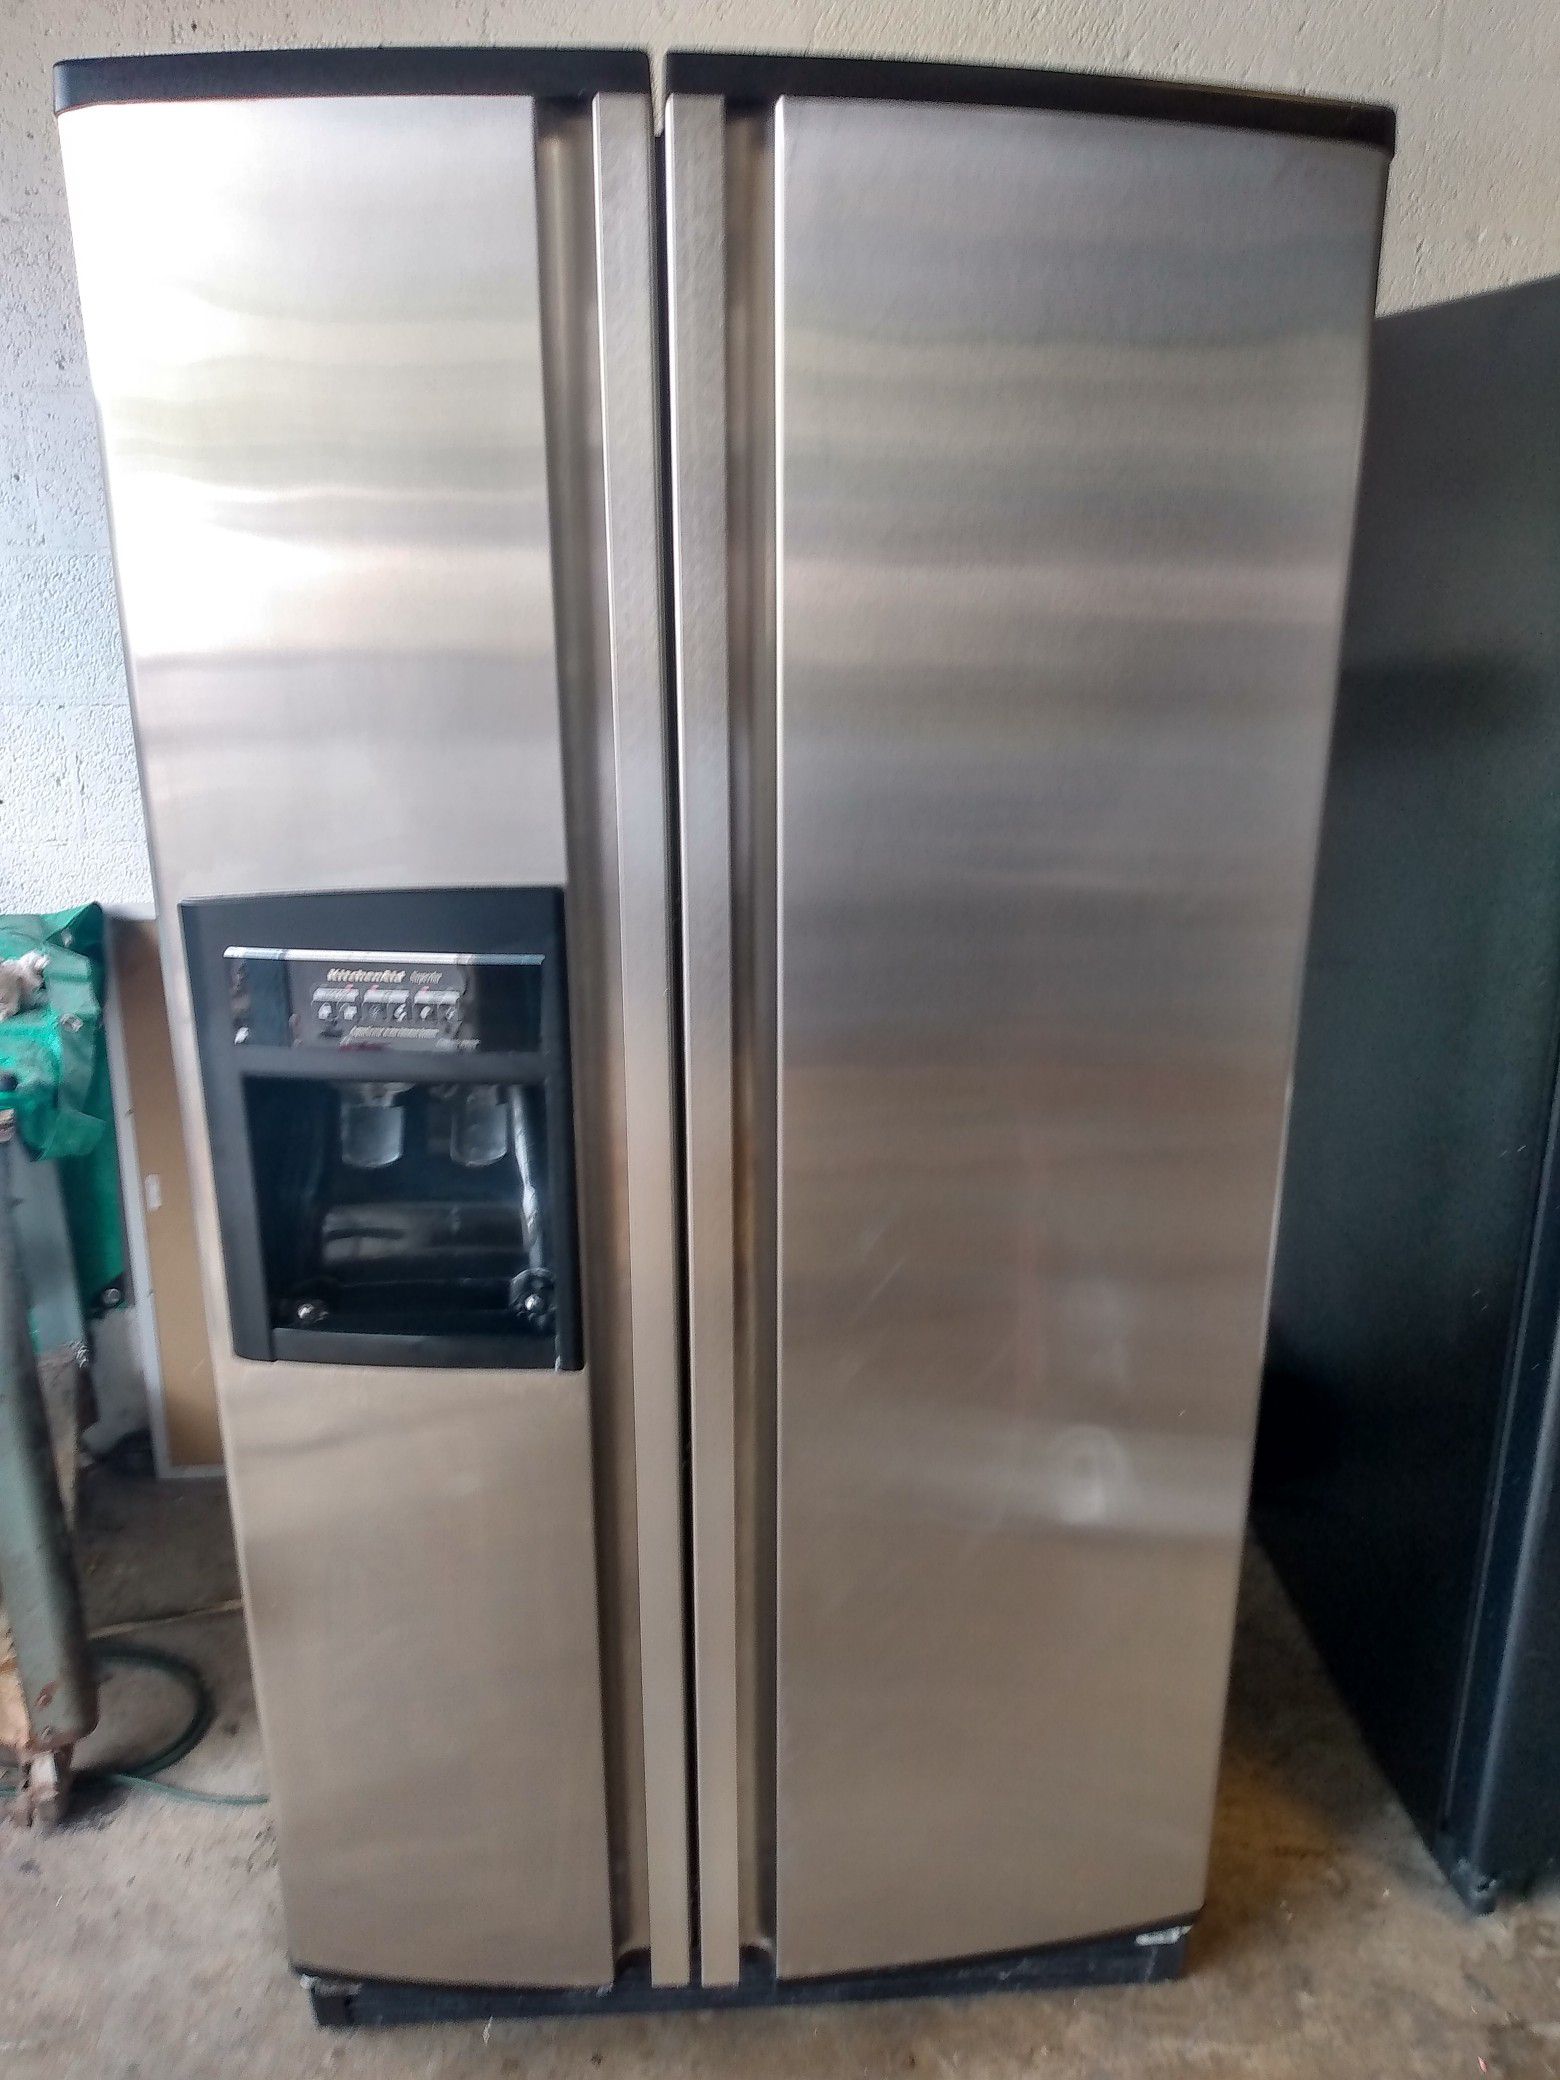 Side-by-side stainless steel refrigerator